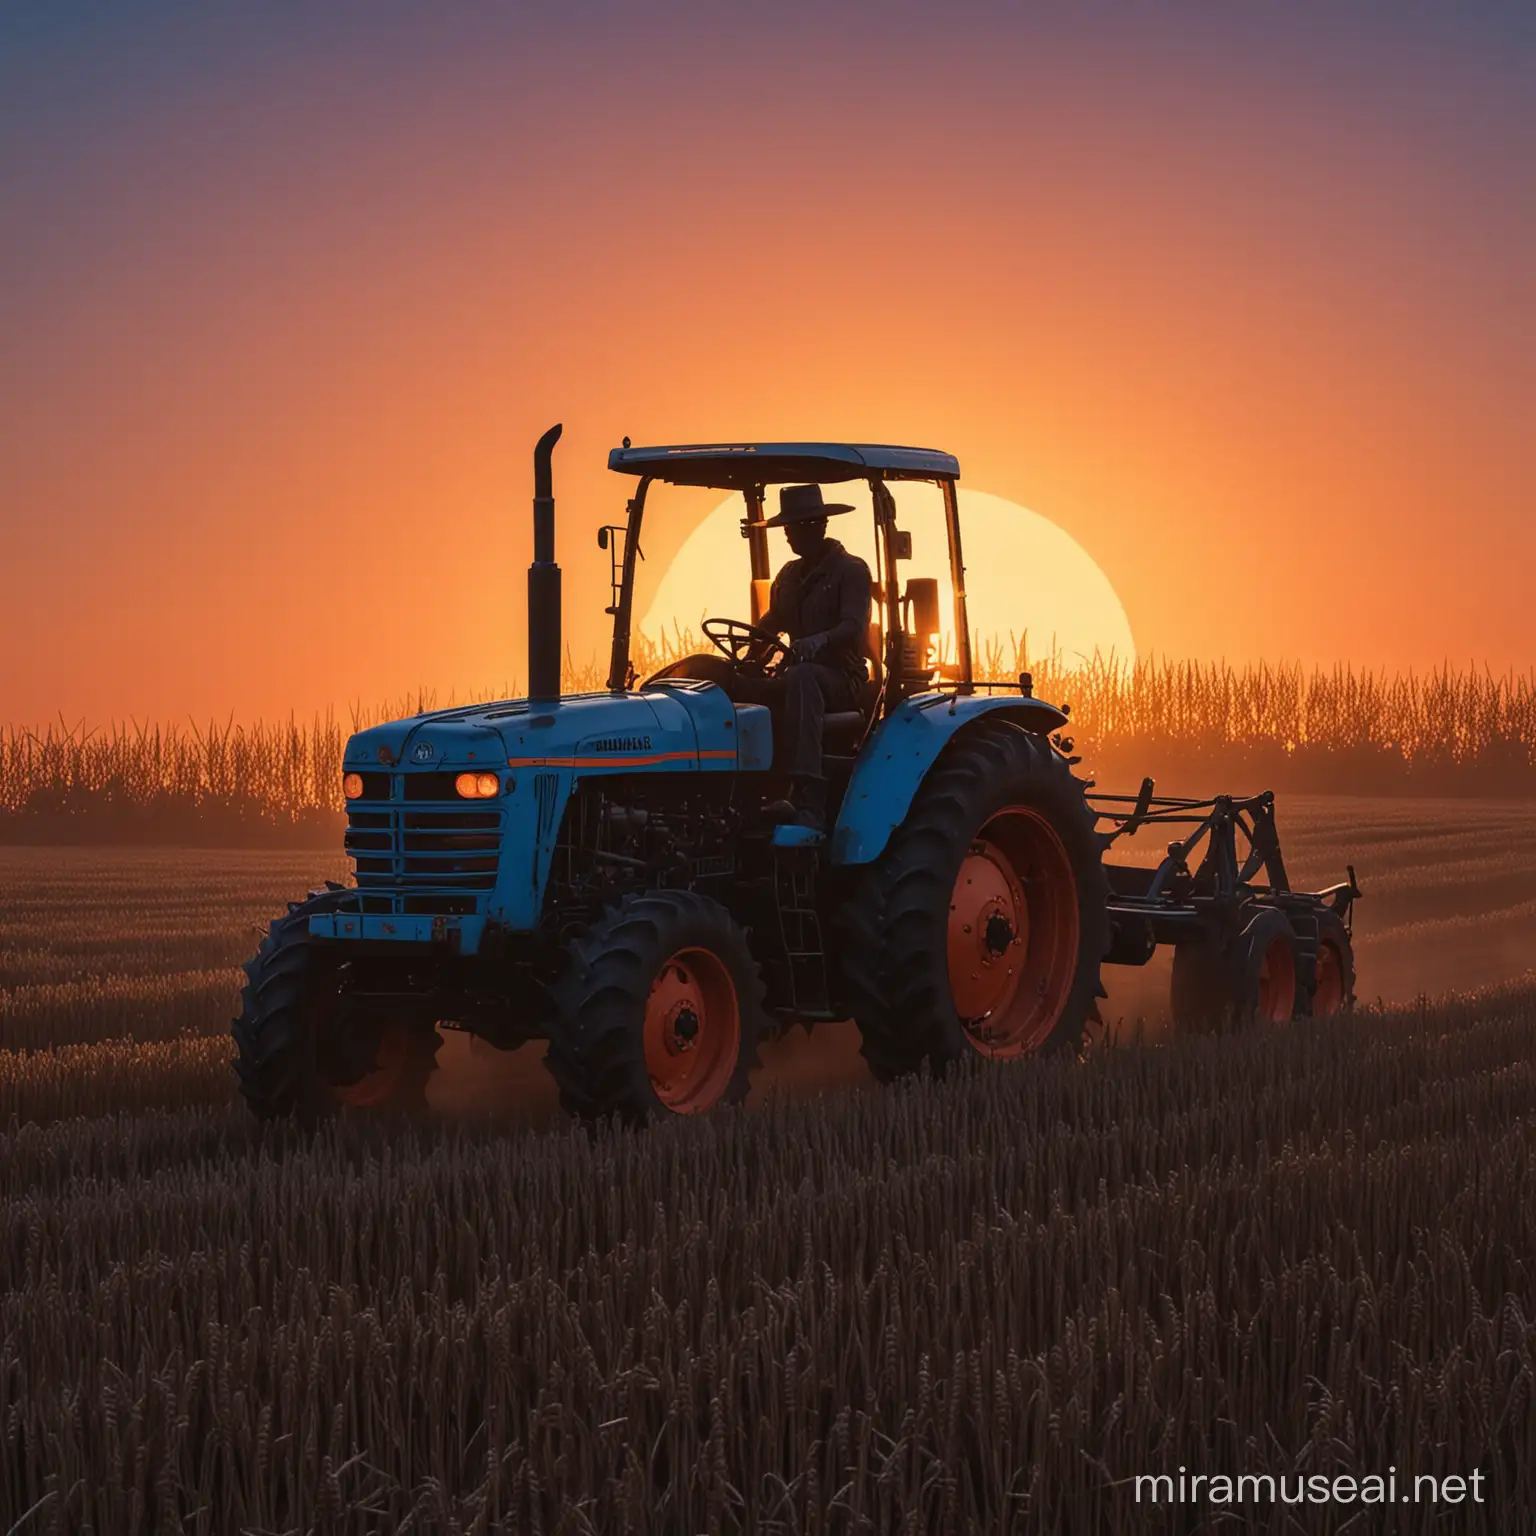 sillouette of a scare-crow driving a tractor (group)
appreance-neon blue/orange /noir/full body/
background-field/wheat/sunset